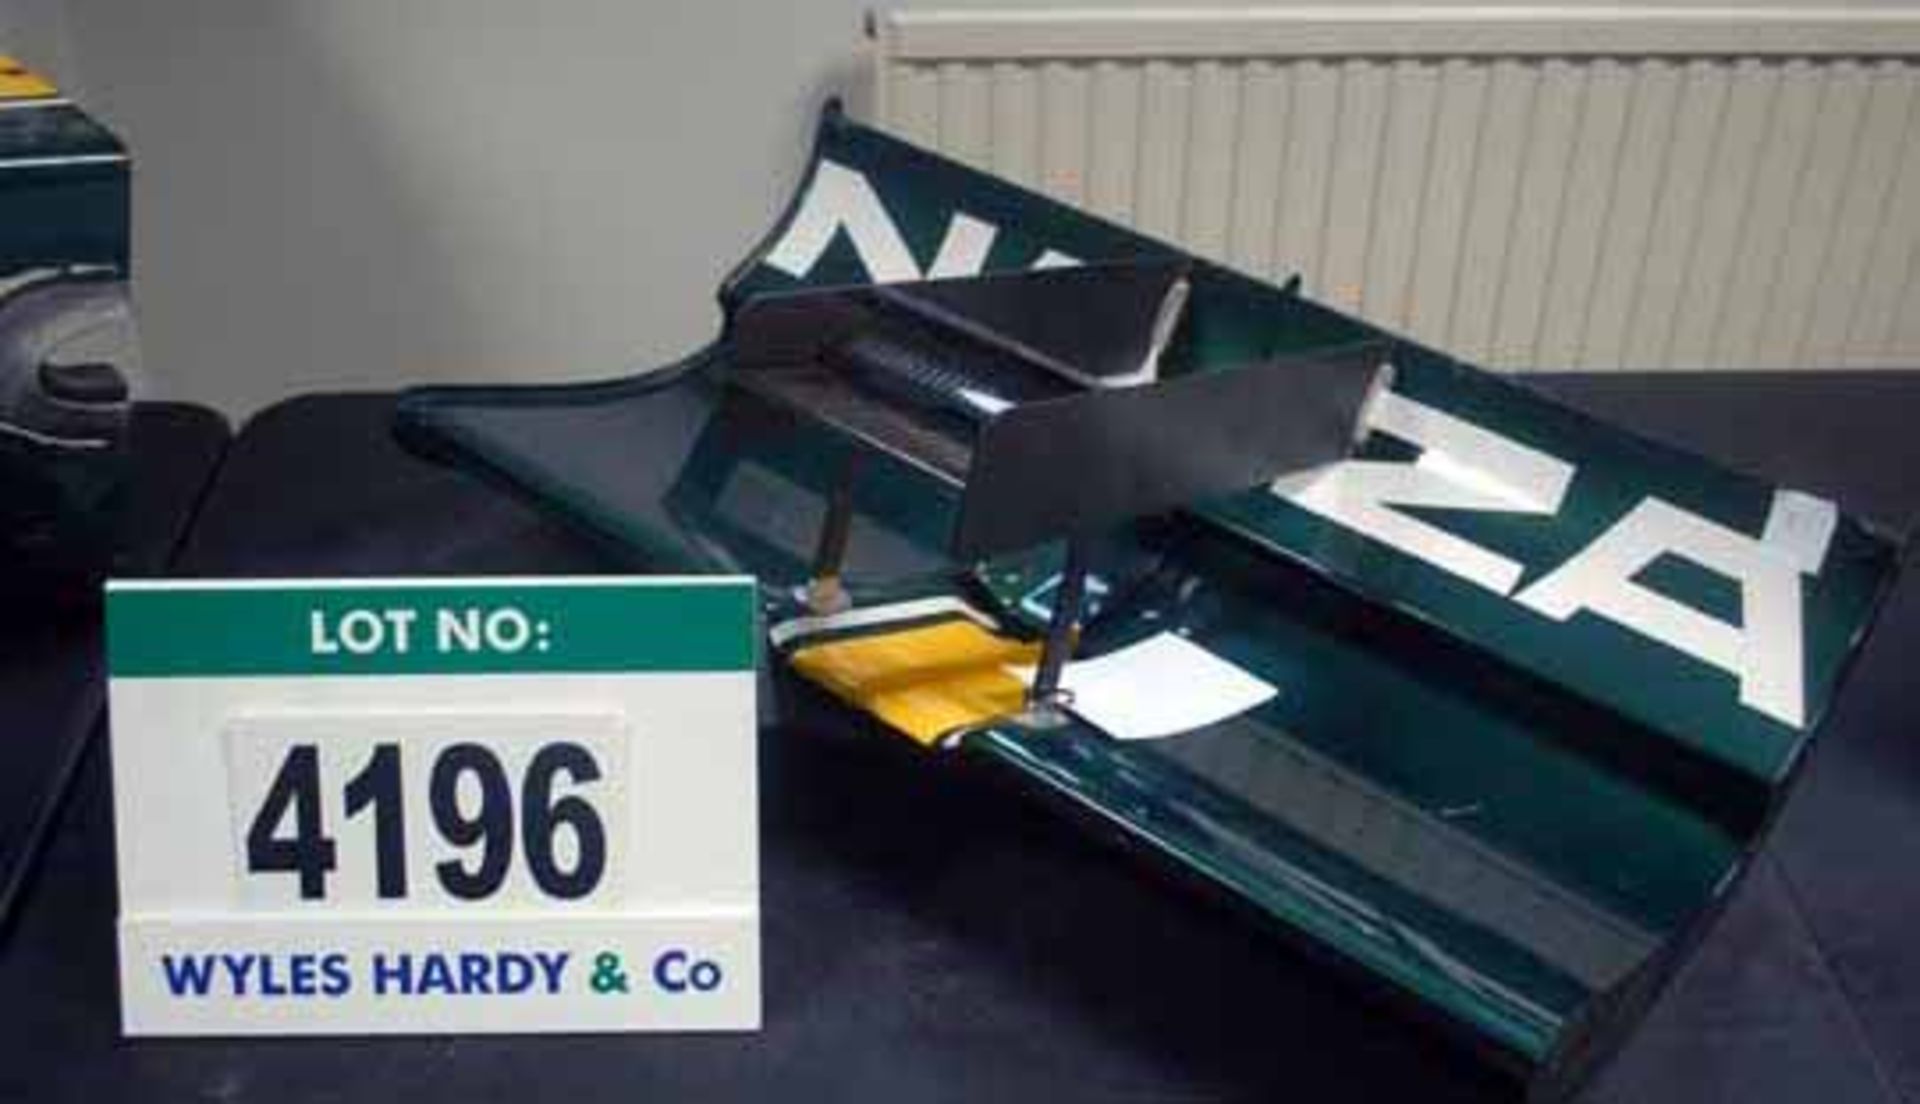 A LOTUS RACING T127 Carbon Fibre Rear Wing Main Plane (Scratched) (Want it Shipped? http://bit.ly/